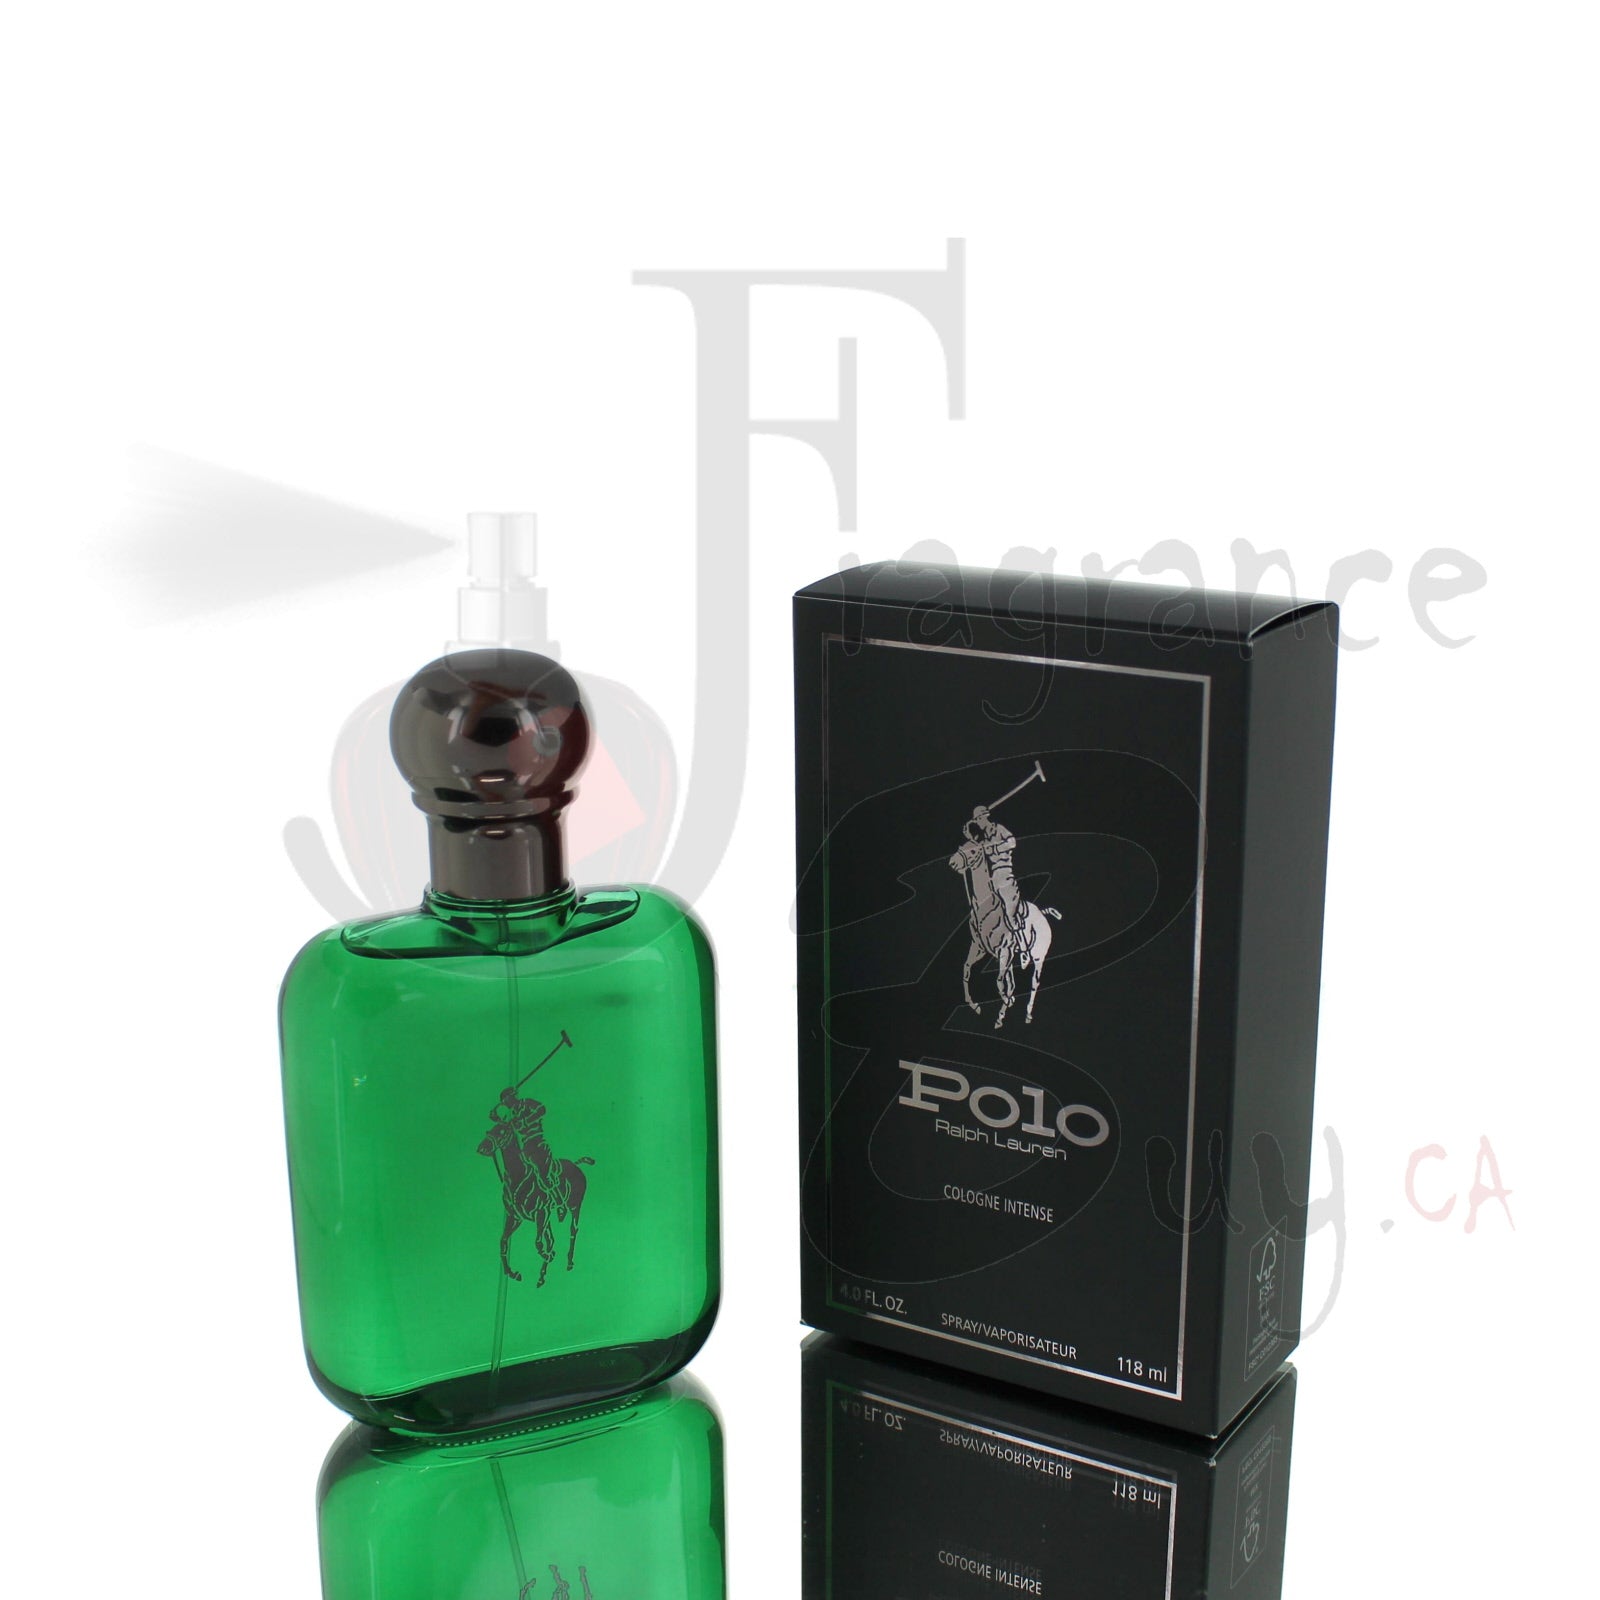  — Latest Ralph Lauren Polo Cologne Intense | Best Price  Online in Canada